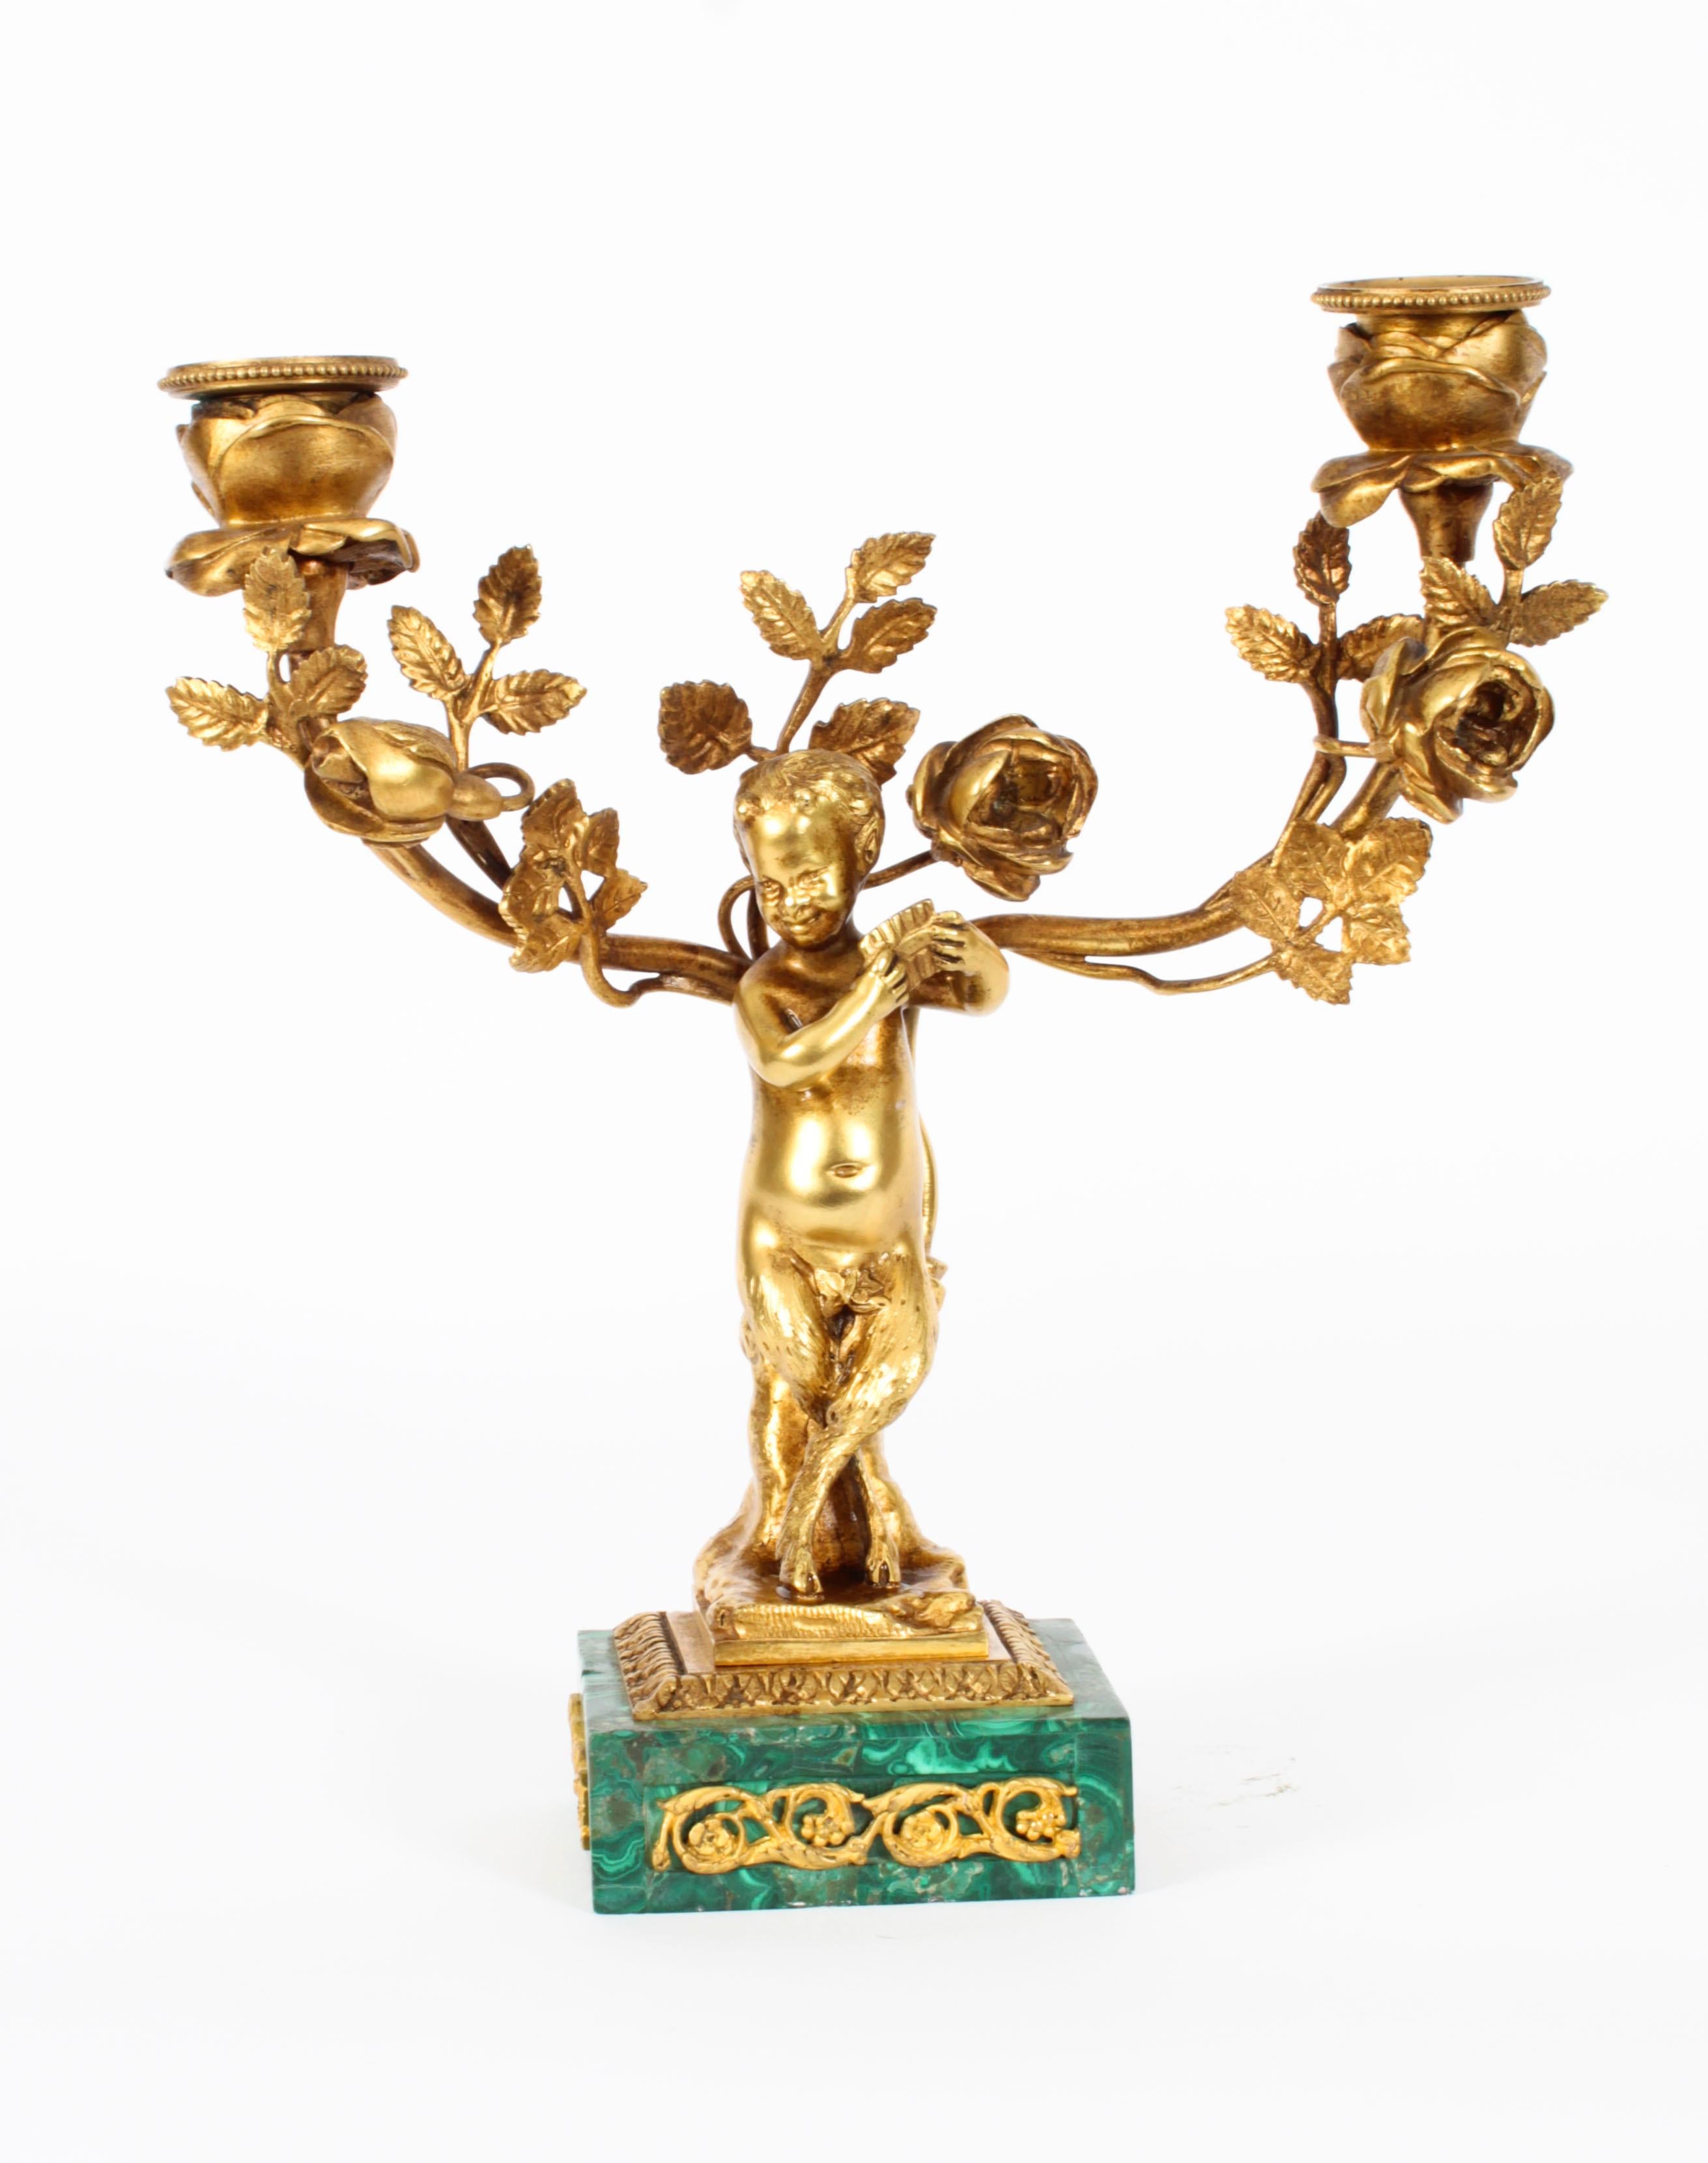 This is a magnificent antique pair of Russian gilt bronze and malachite candelabra, Circa 1900 in date.
 
The ormolu candelabra with floral branchwork supported by a pair of musical cherubs, one playing the triangle the other playing pipes.
